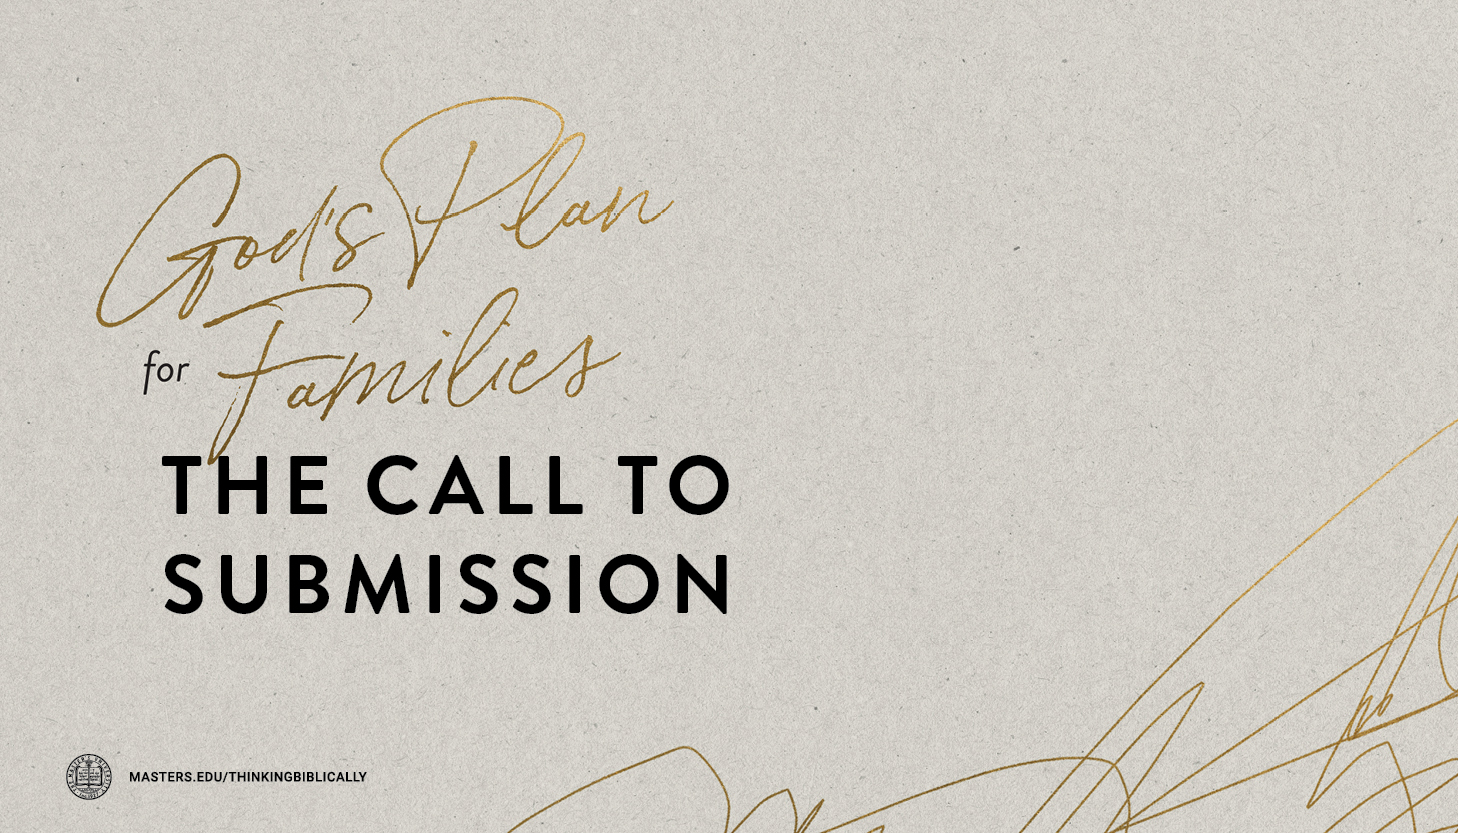 The Call to Submission